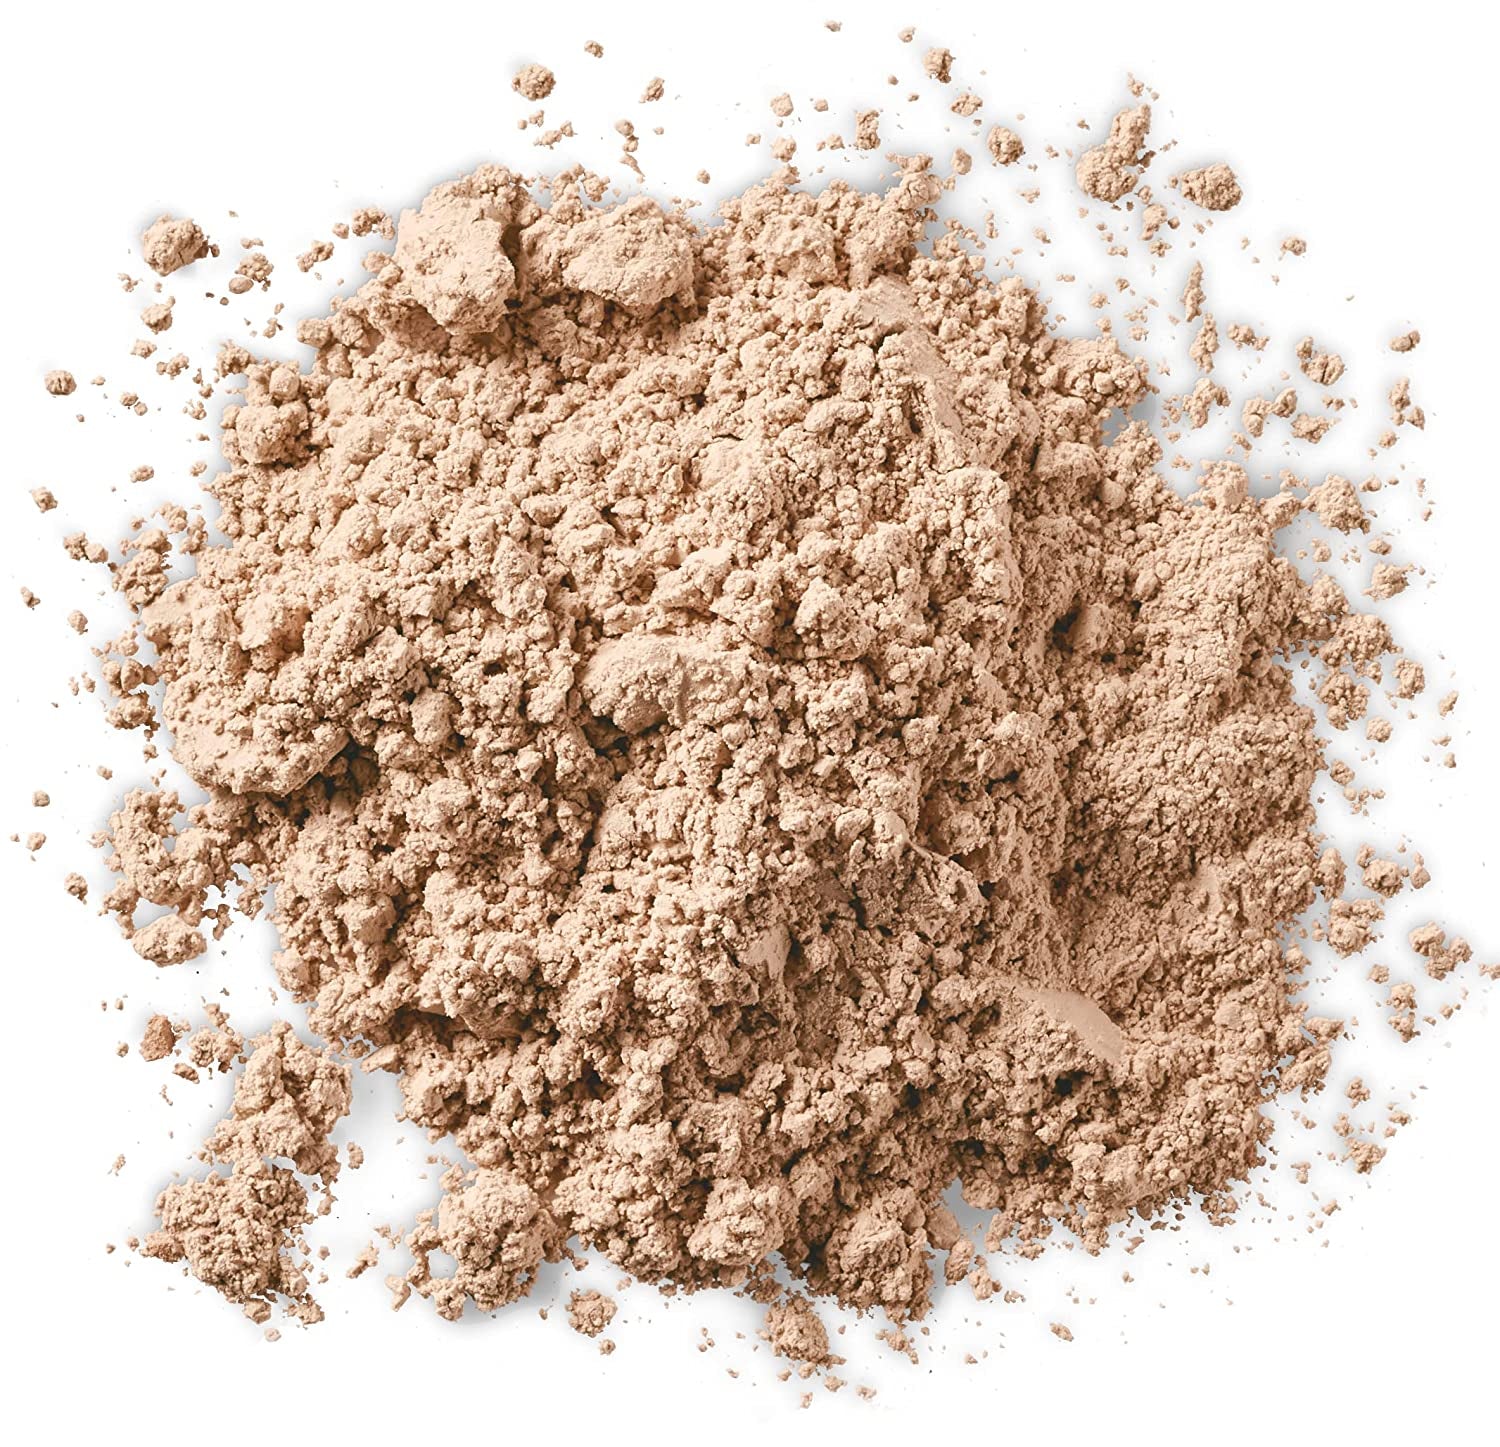 Mineral Wear Talc-Free Loose Powder Creamy Natural, Dermatologist Tested, Clinically Tested - HealthFulBeautyLife